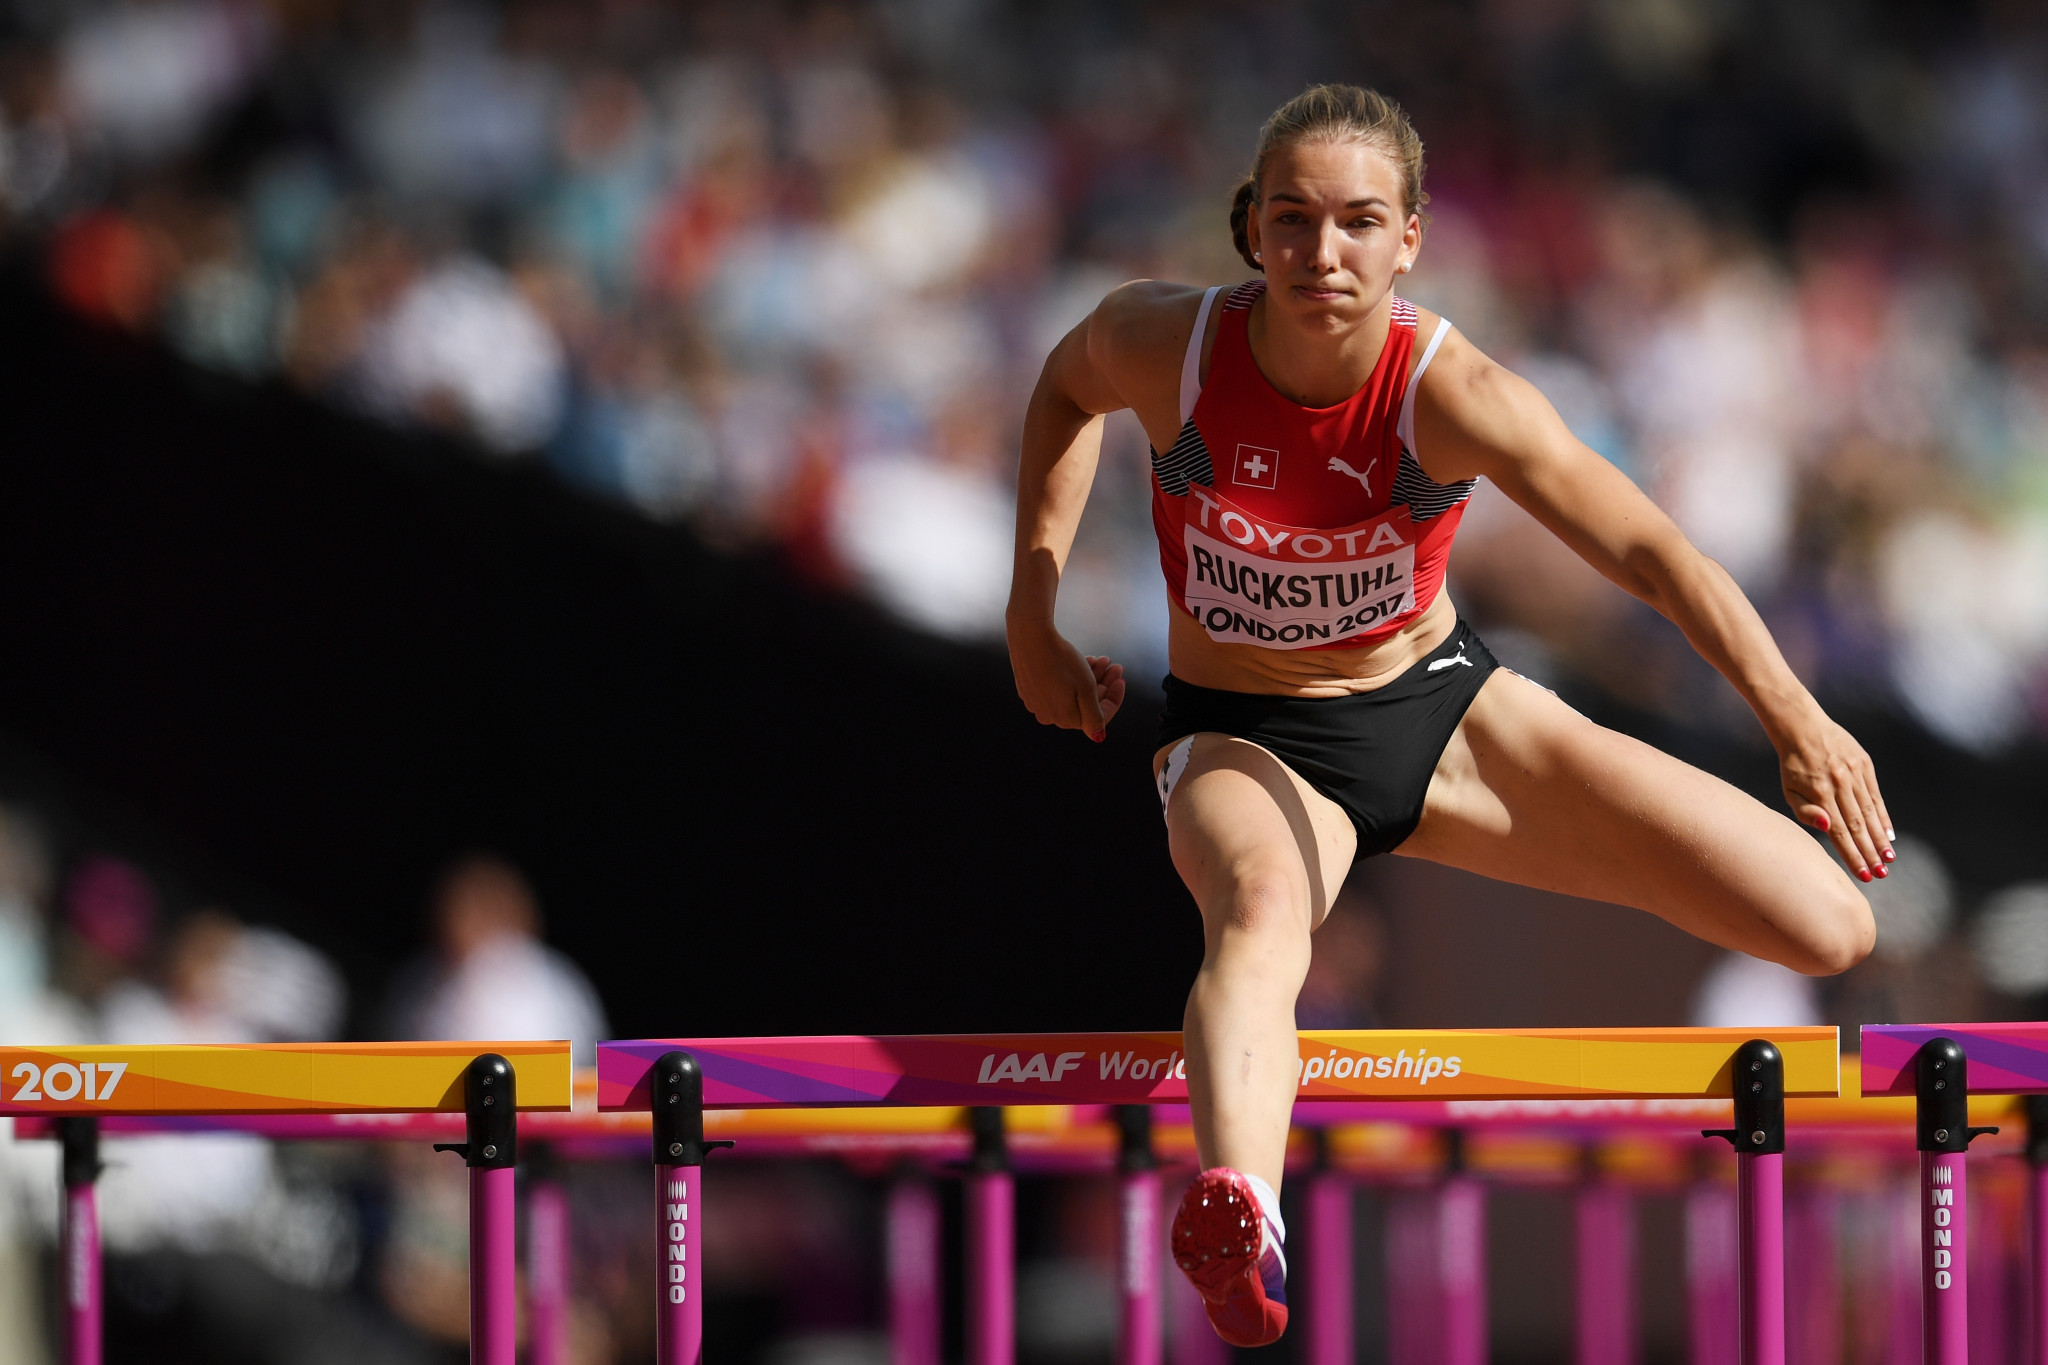 Geraldine Ruckstuh headlines the heptathlon entries for this weekend's meeting in Grossetto ©Getty Images